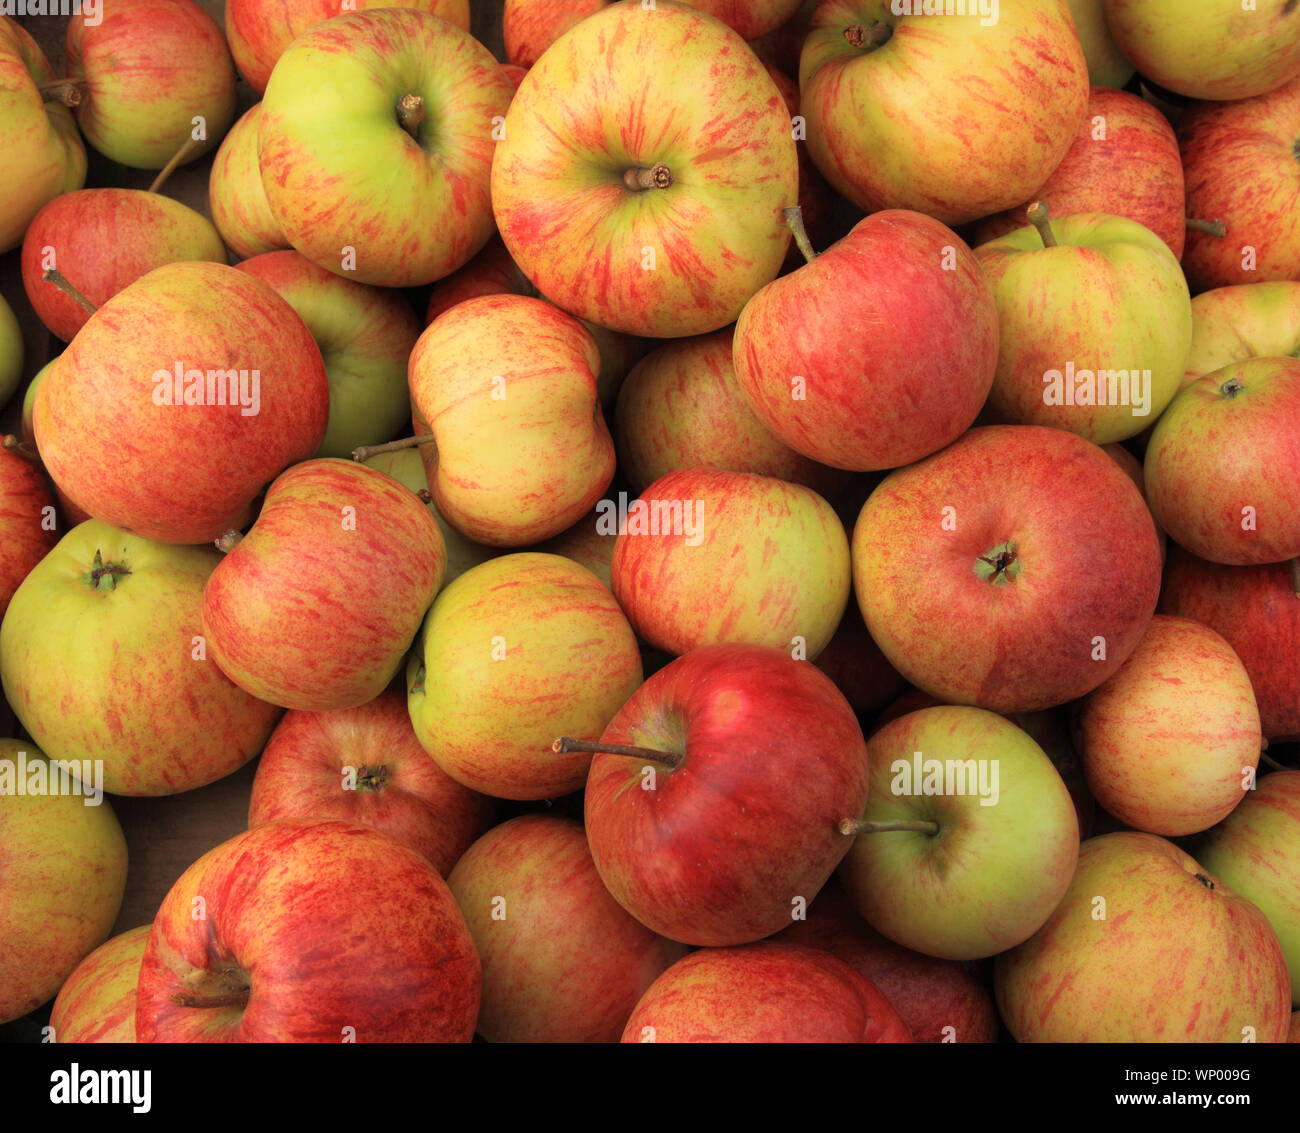 Apple 'Epicure', apples, named variety, healthy eating, farm shop, display Stock Photo